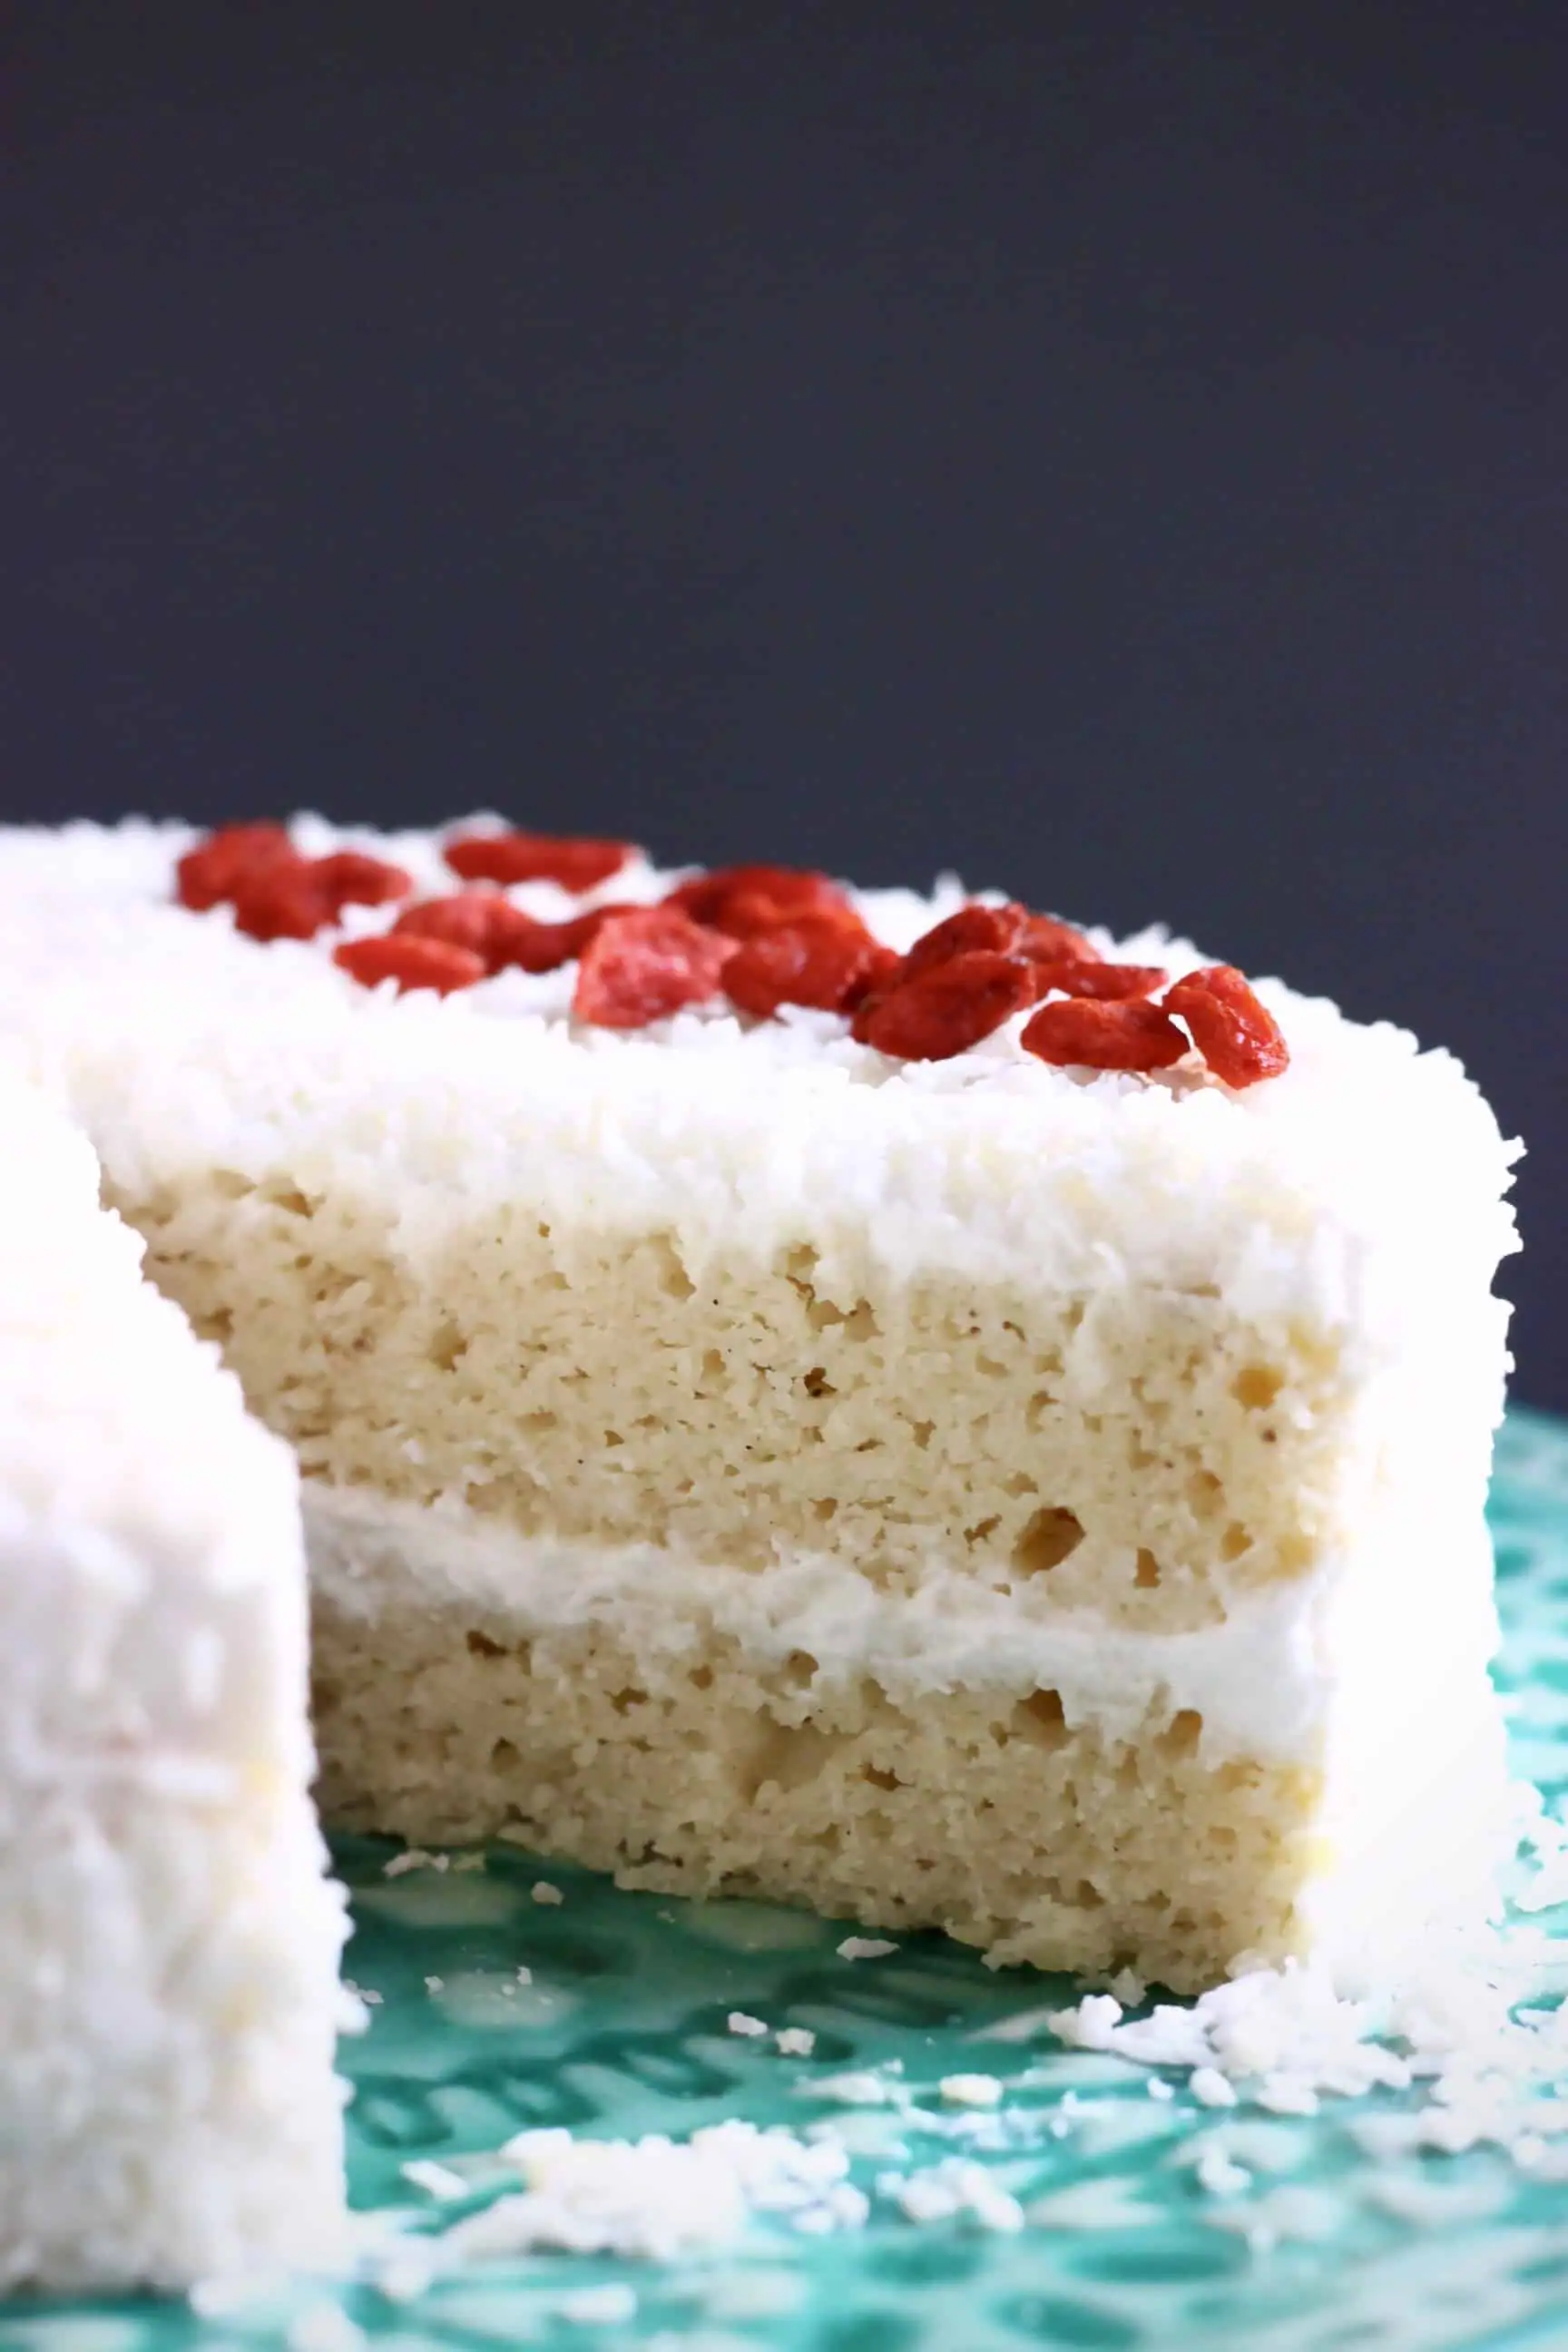 A sliced gluten-free vegan coconut cake topped with desiccated coconut and red goji berries